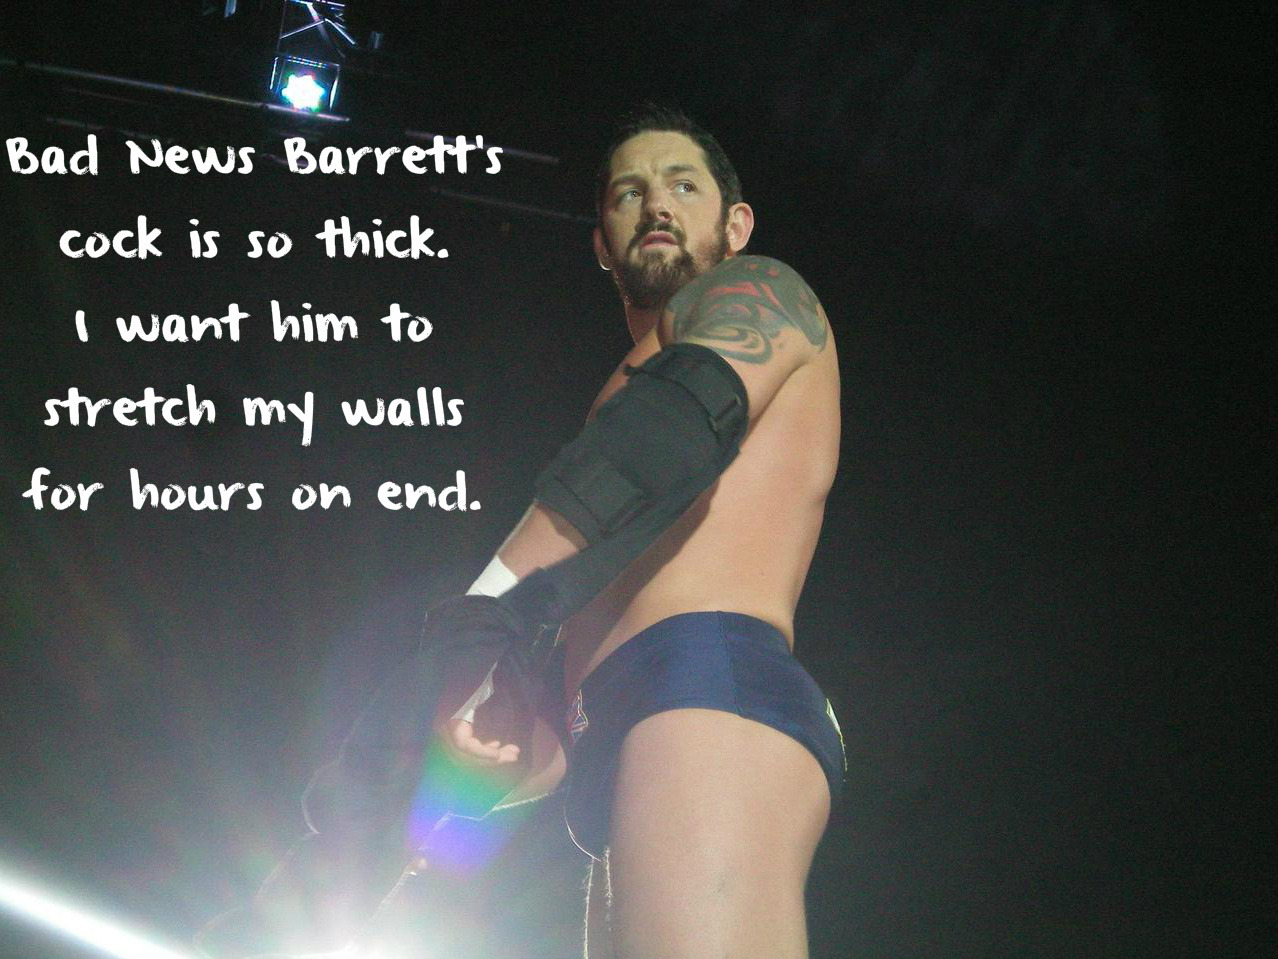 wrestlingssexconfessions:  Bad News Barrett’s cock is so thick. I want him to stretch